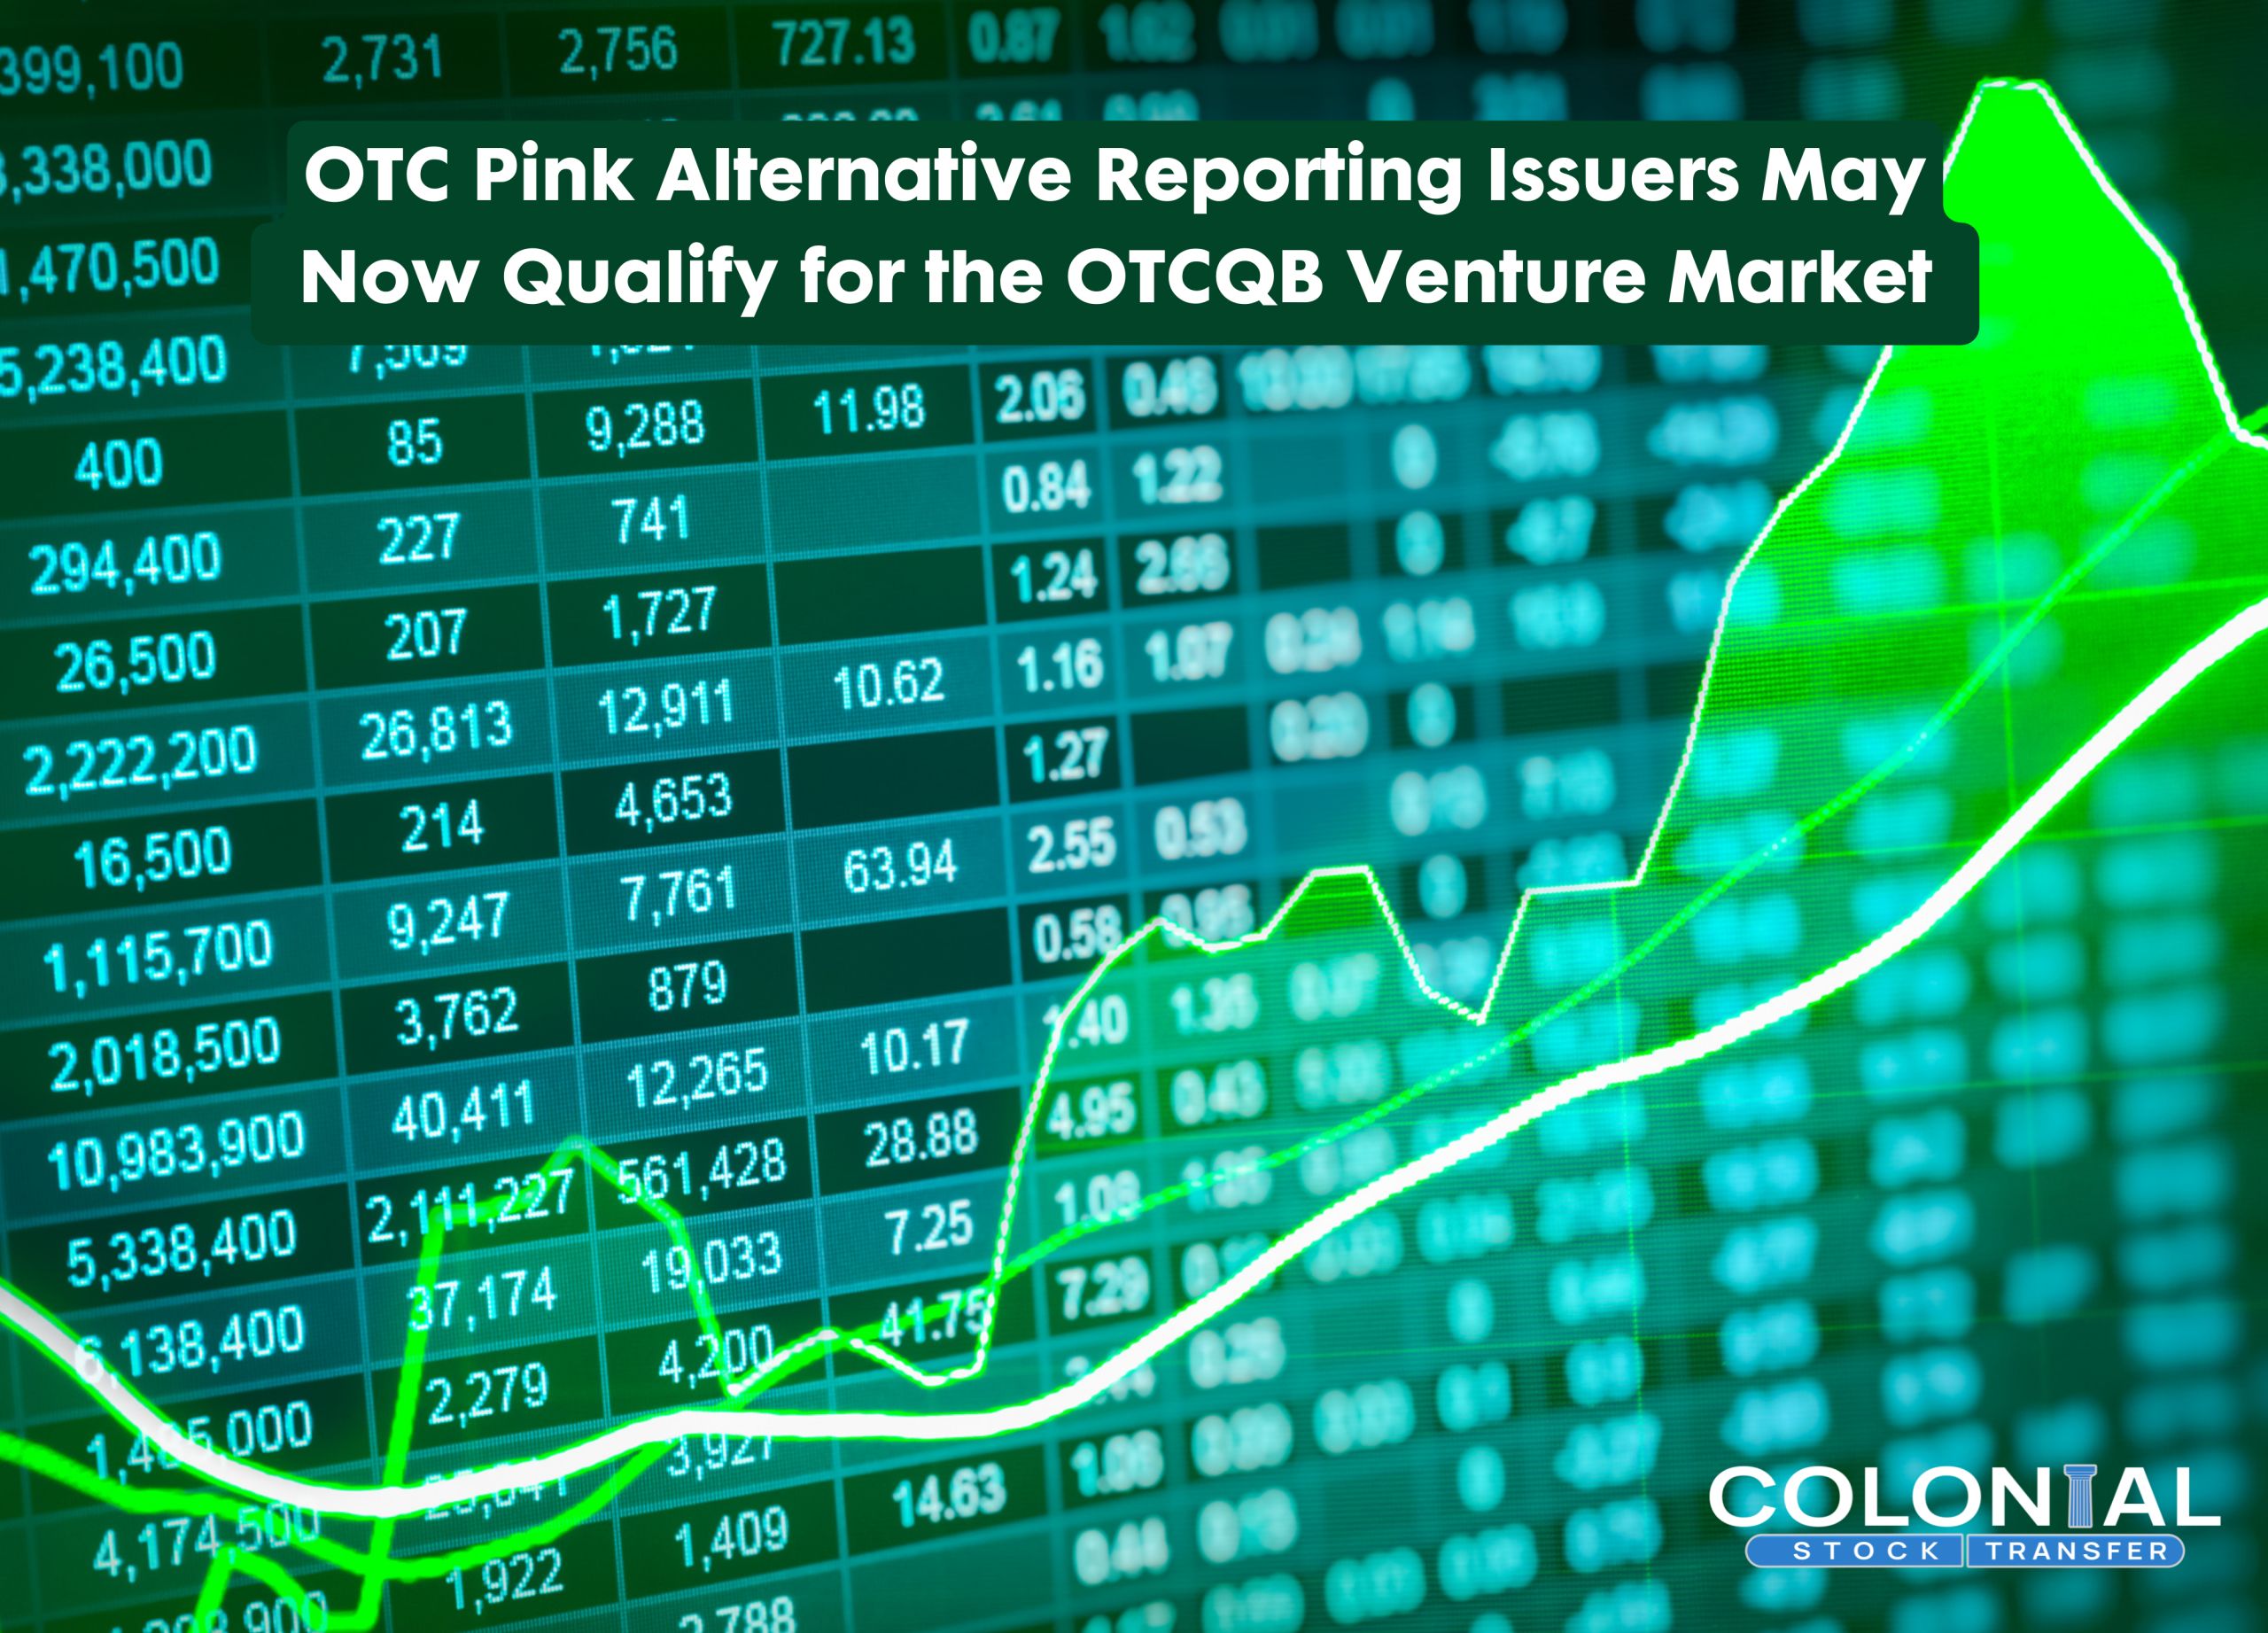 OTC Pink Alternative Reporting Issuers May Now Qualify for the OTCQB Venture Market